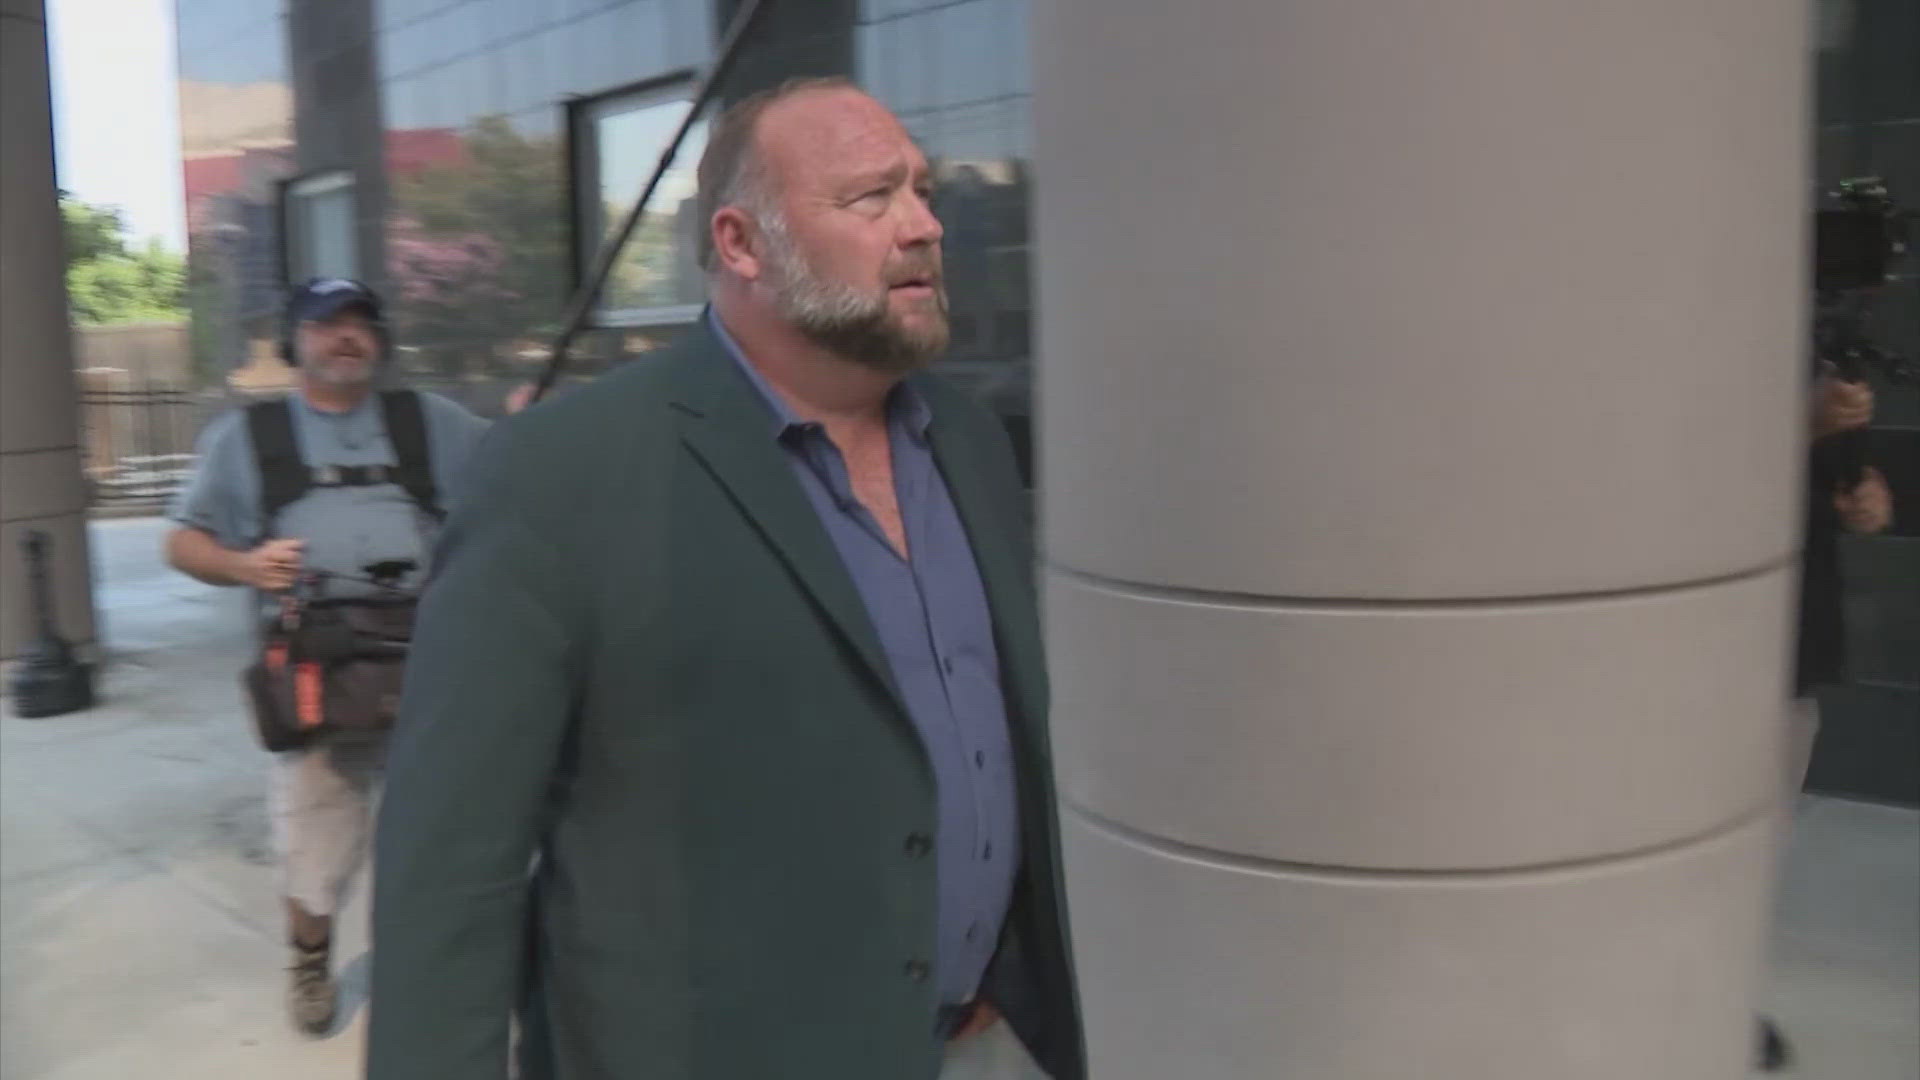 The ruling leaves the future of Jones' Infowars media platform uncertain as he owes $1.5 billion for his lies that the Sandy Hook Elementary shooting was a hoax.